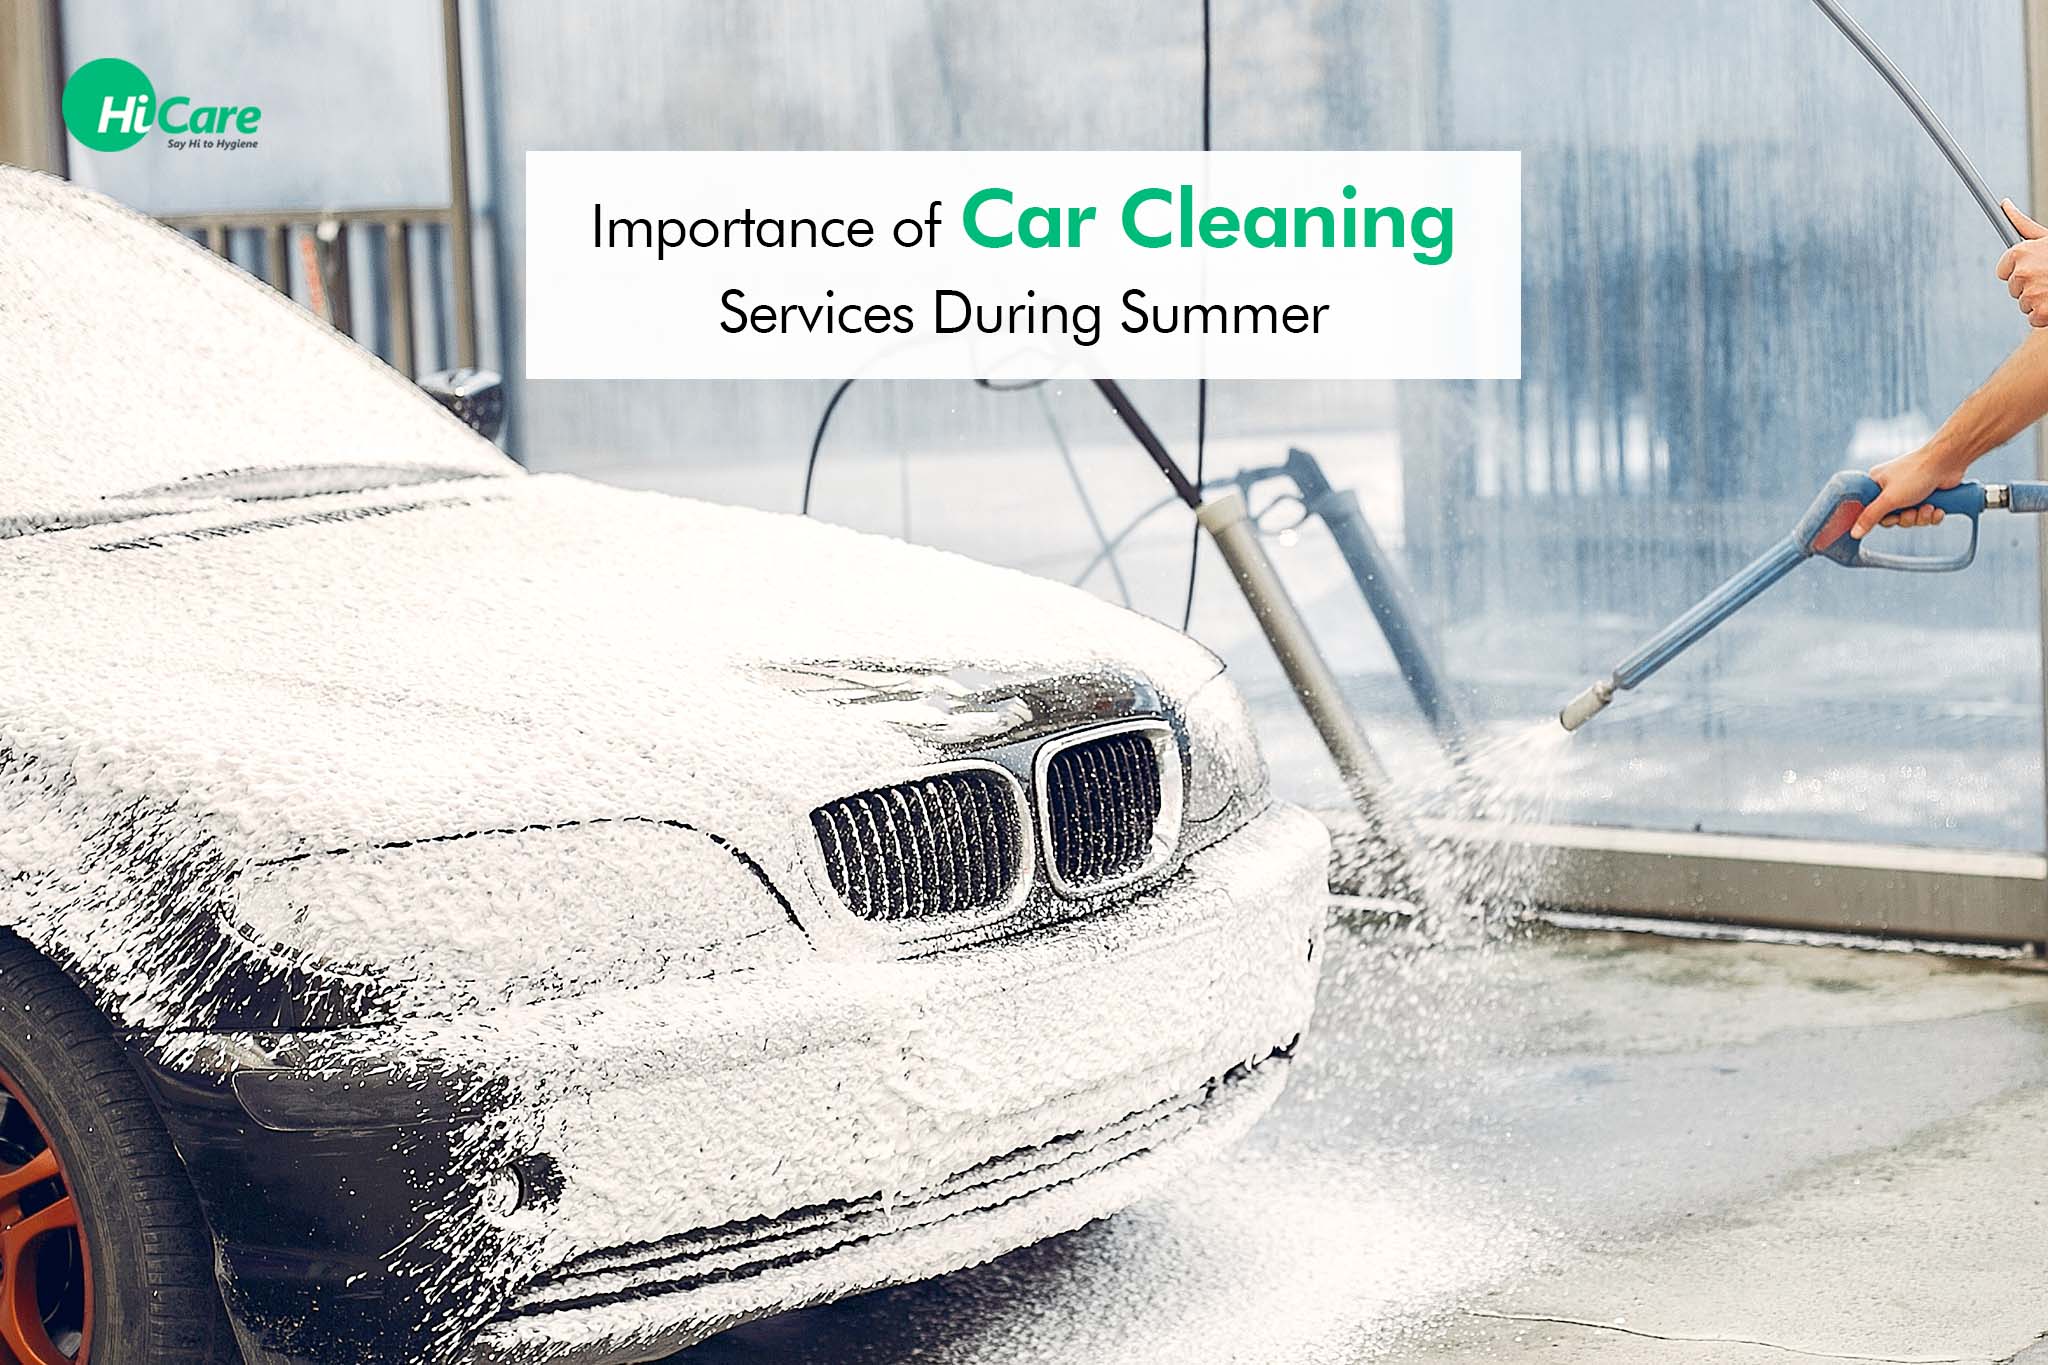 Importance Of Routinely Washing Your Vehicles - Escalon Times